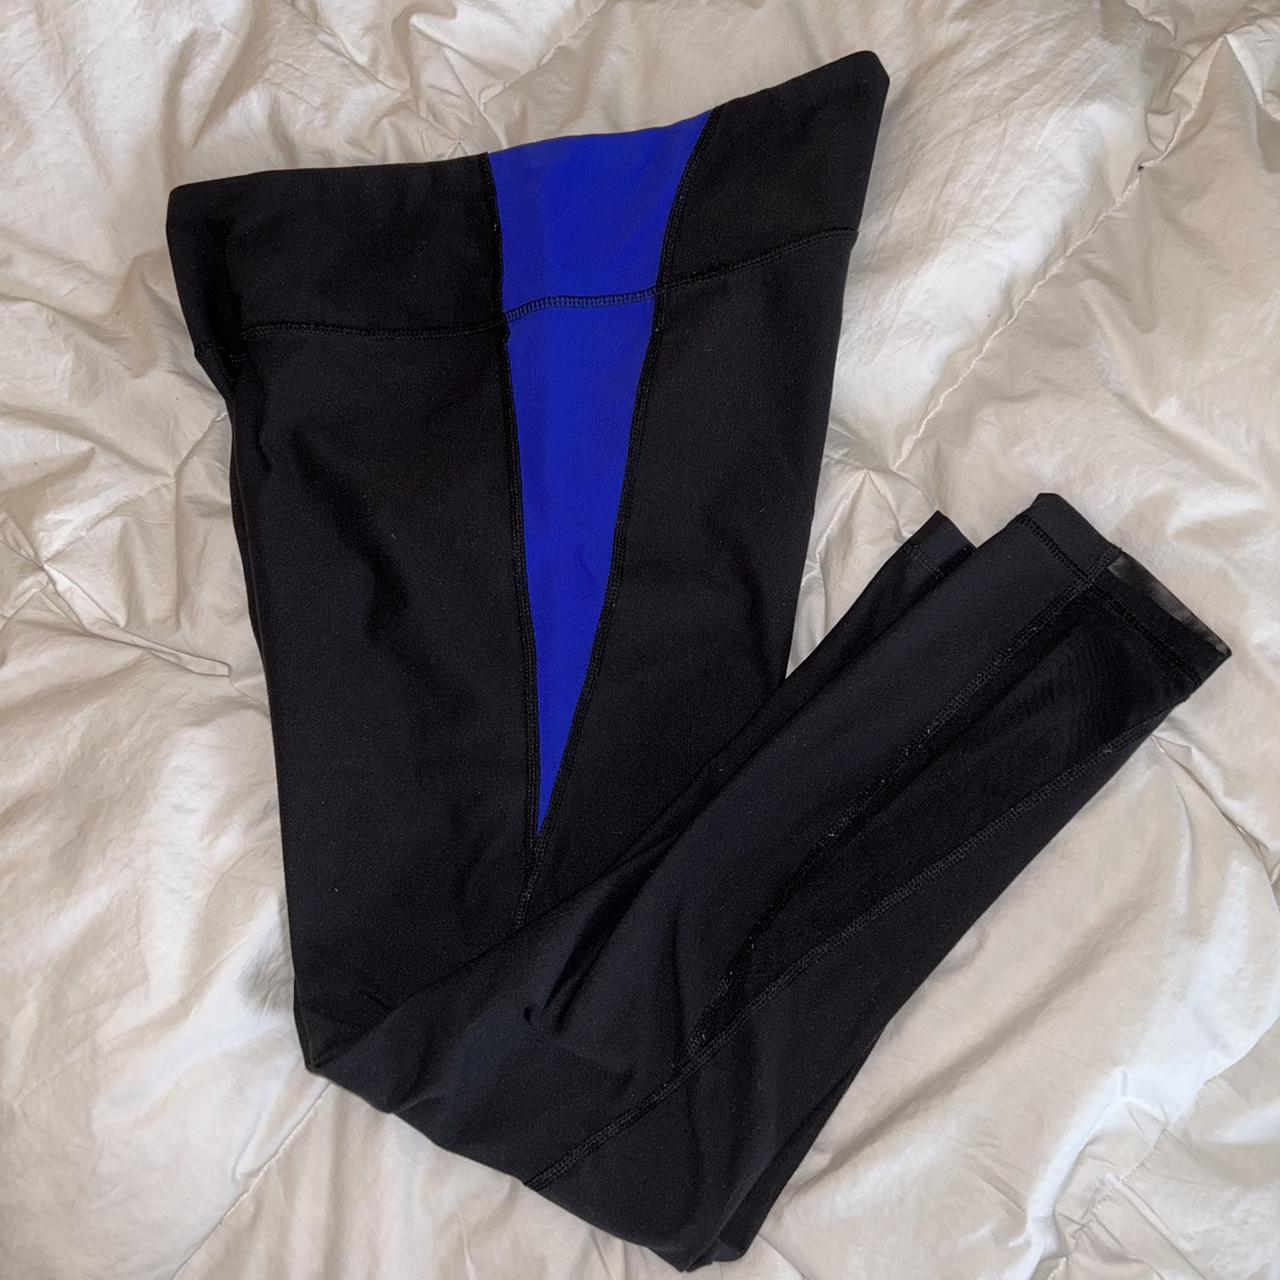 90 Degree by Reflex Leggings with blue and sheer